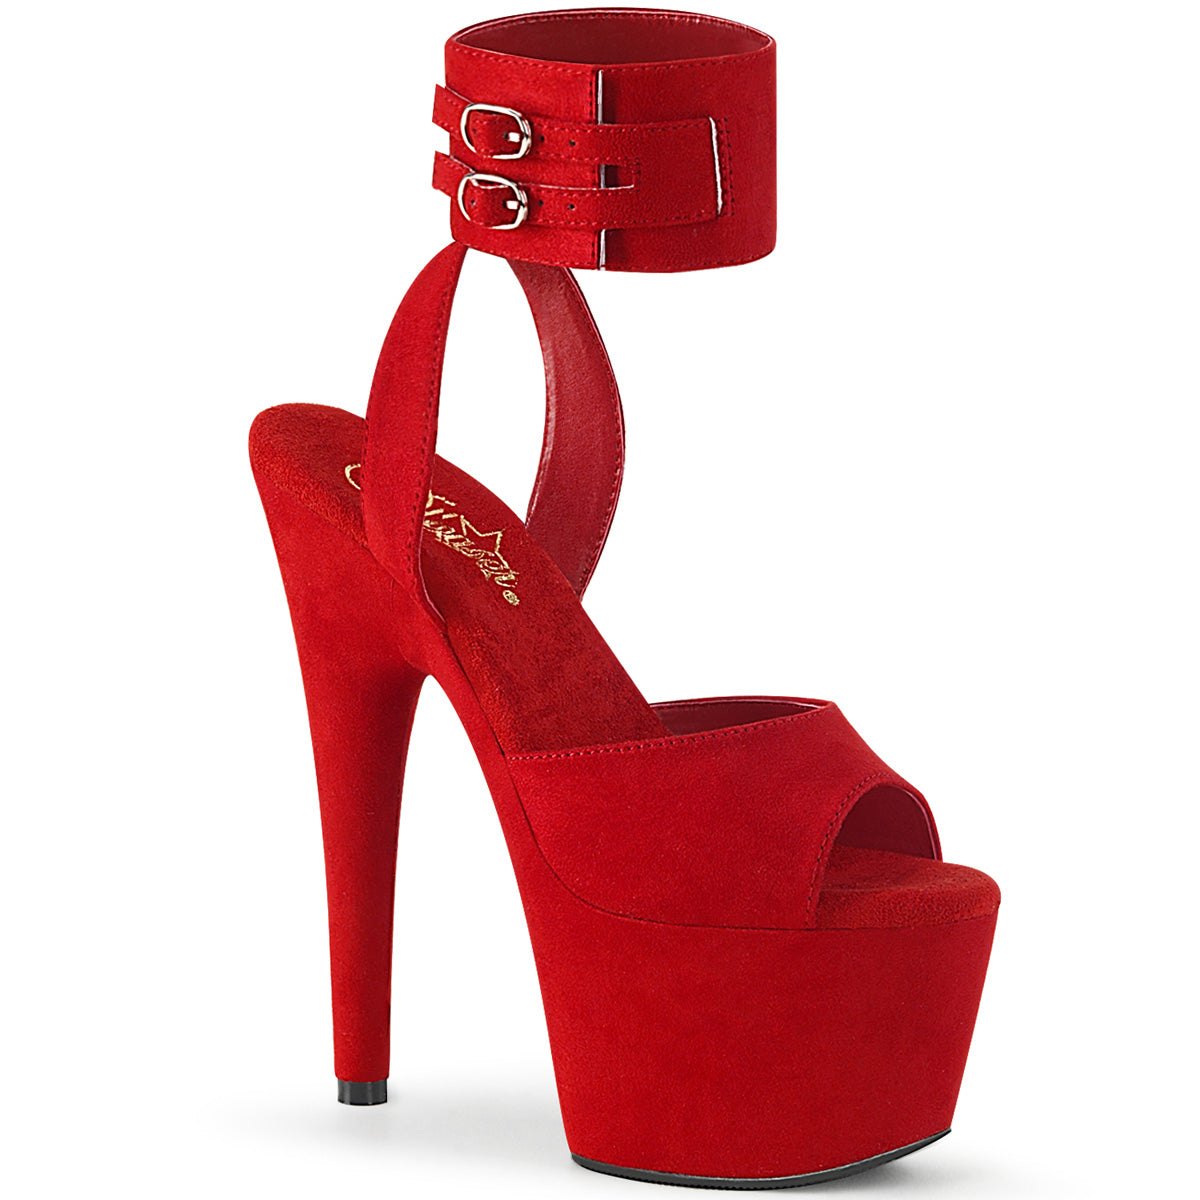 Pleaser Sandalias para mujer ADORE-791FS Red Faux Suda / Red Faux Suede